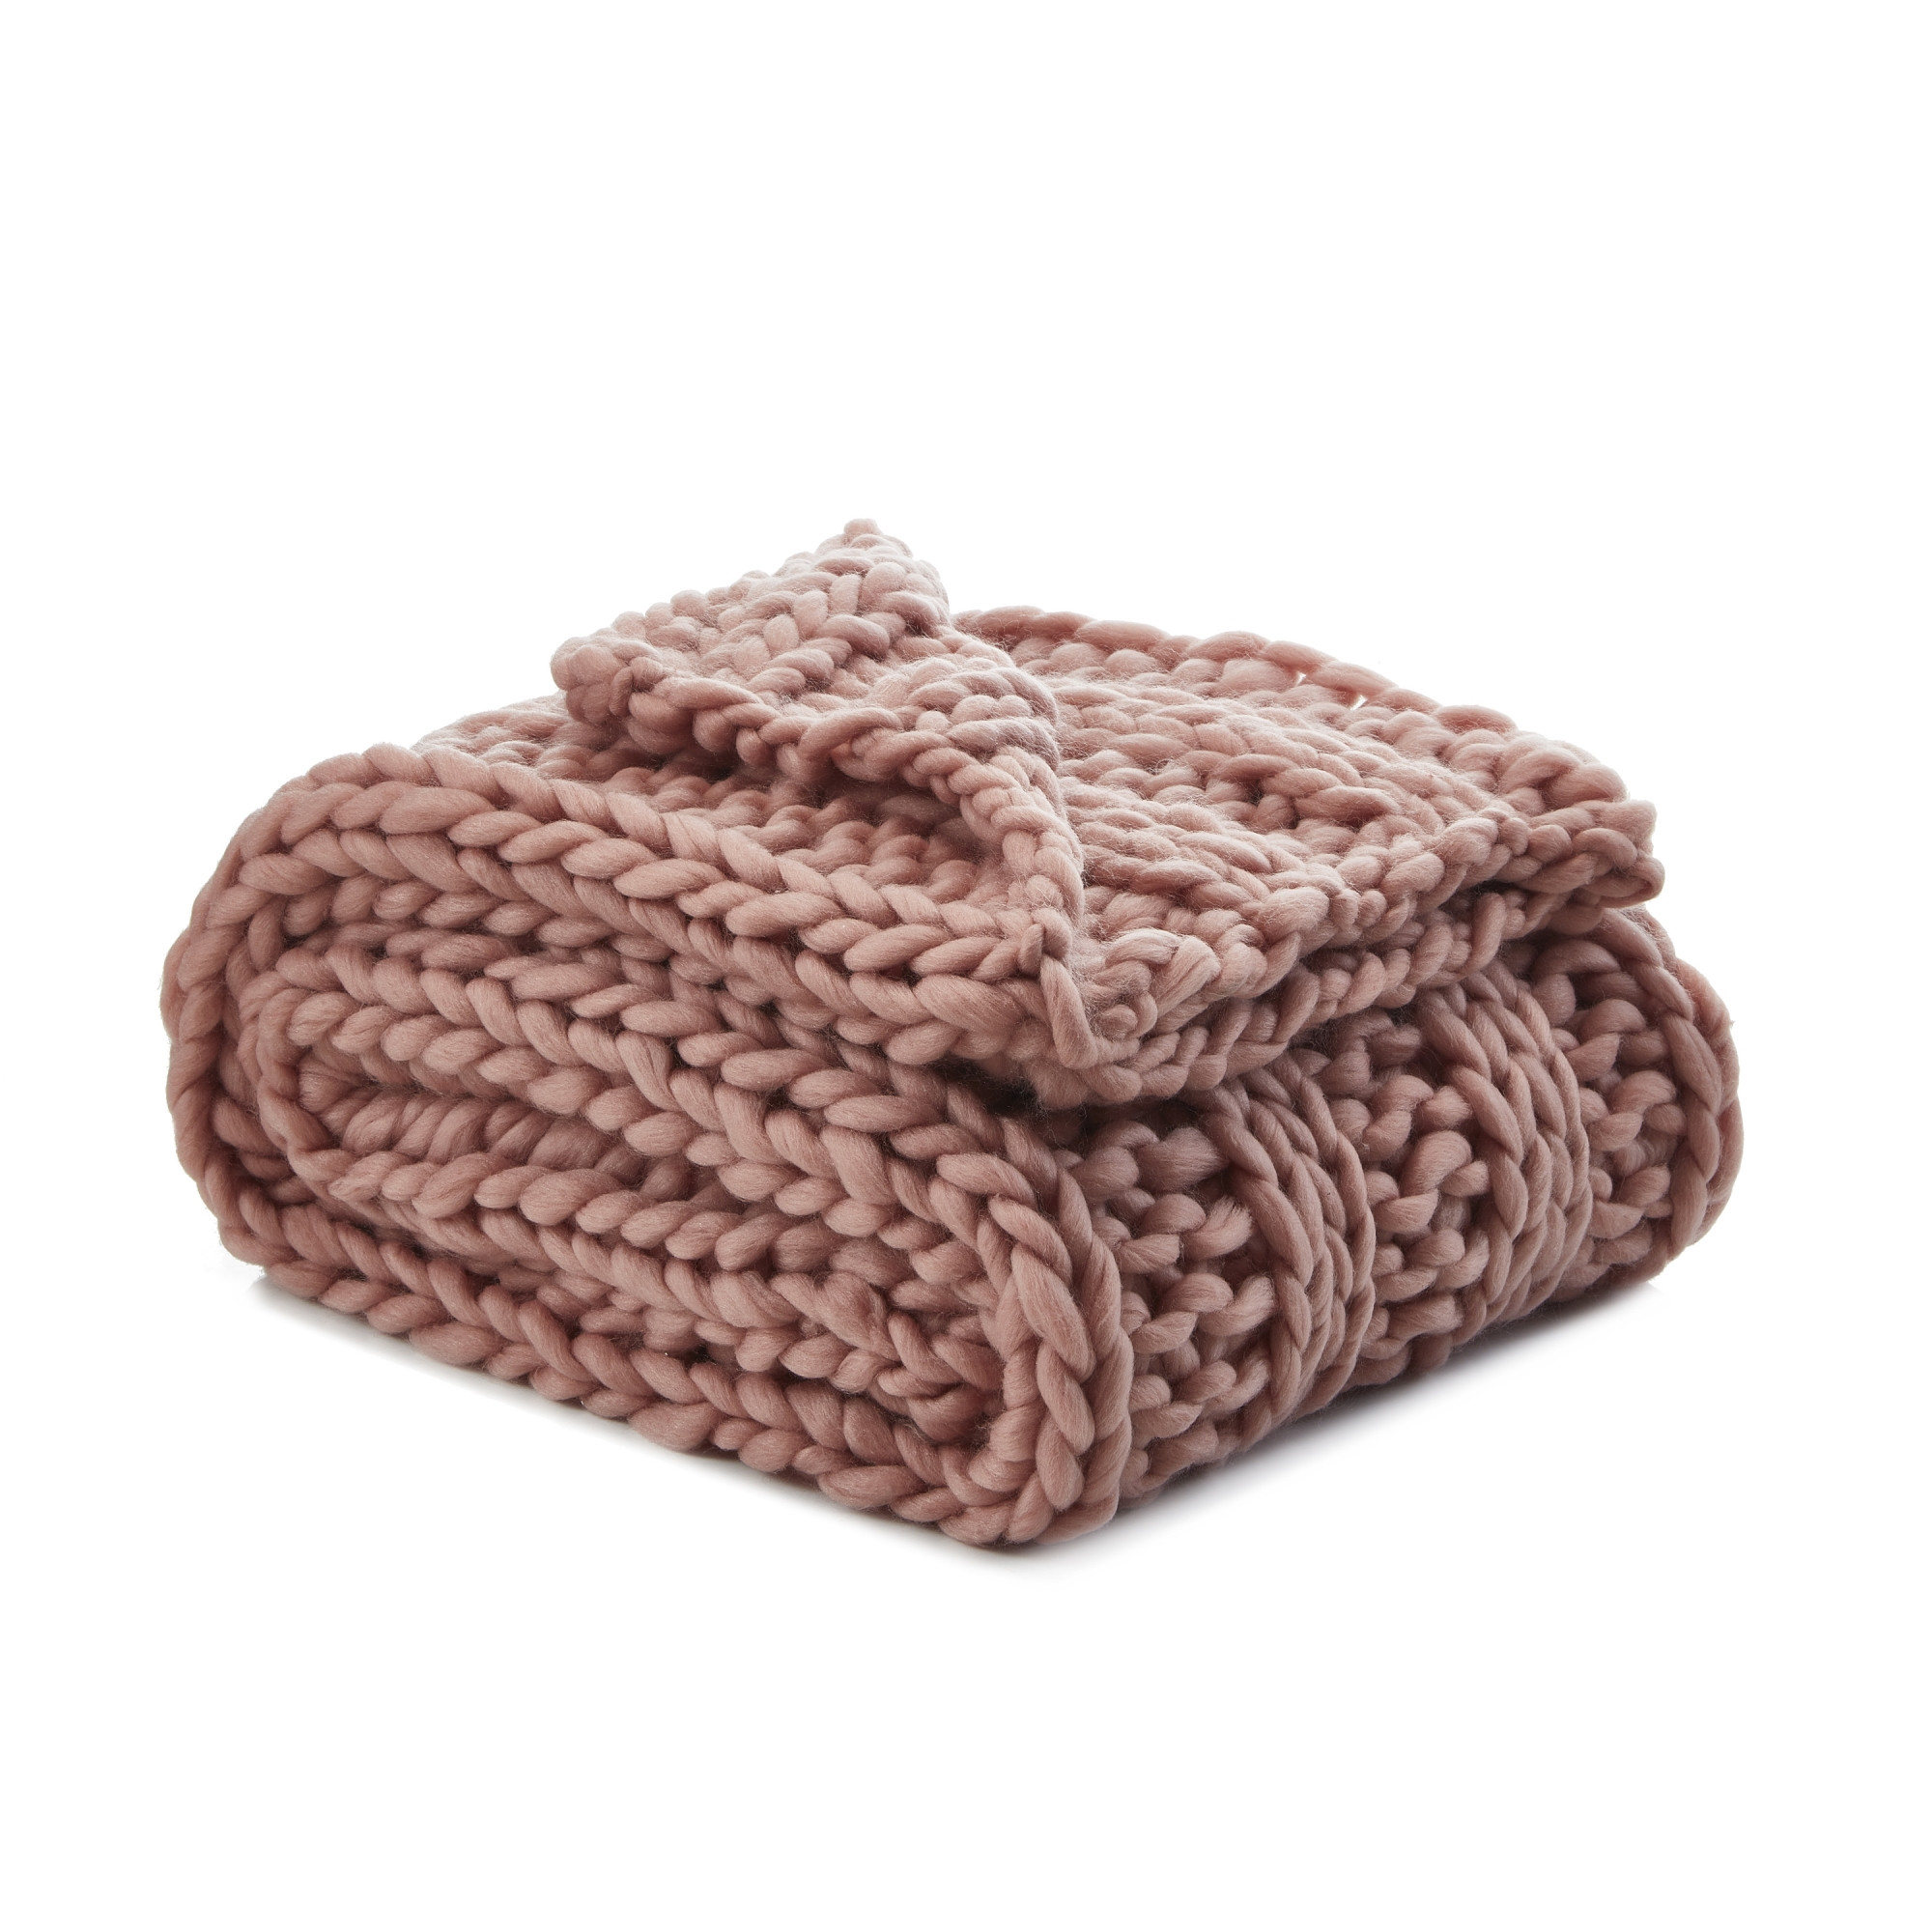 Blush Knitted Polyester Solid Color Throw Blanket-531267-1